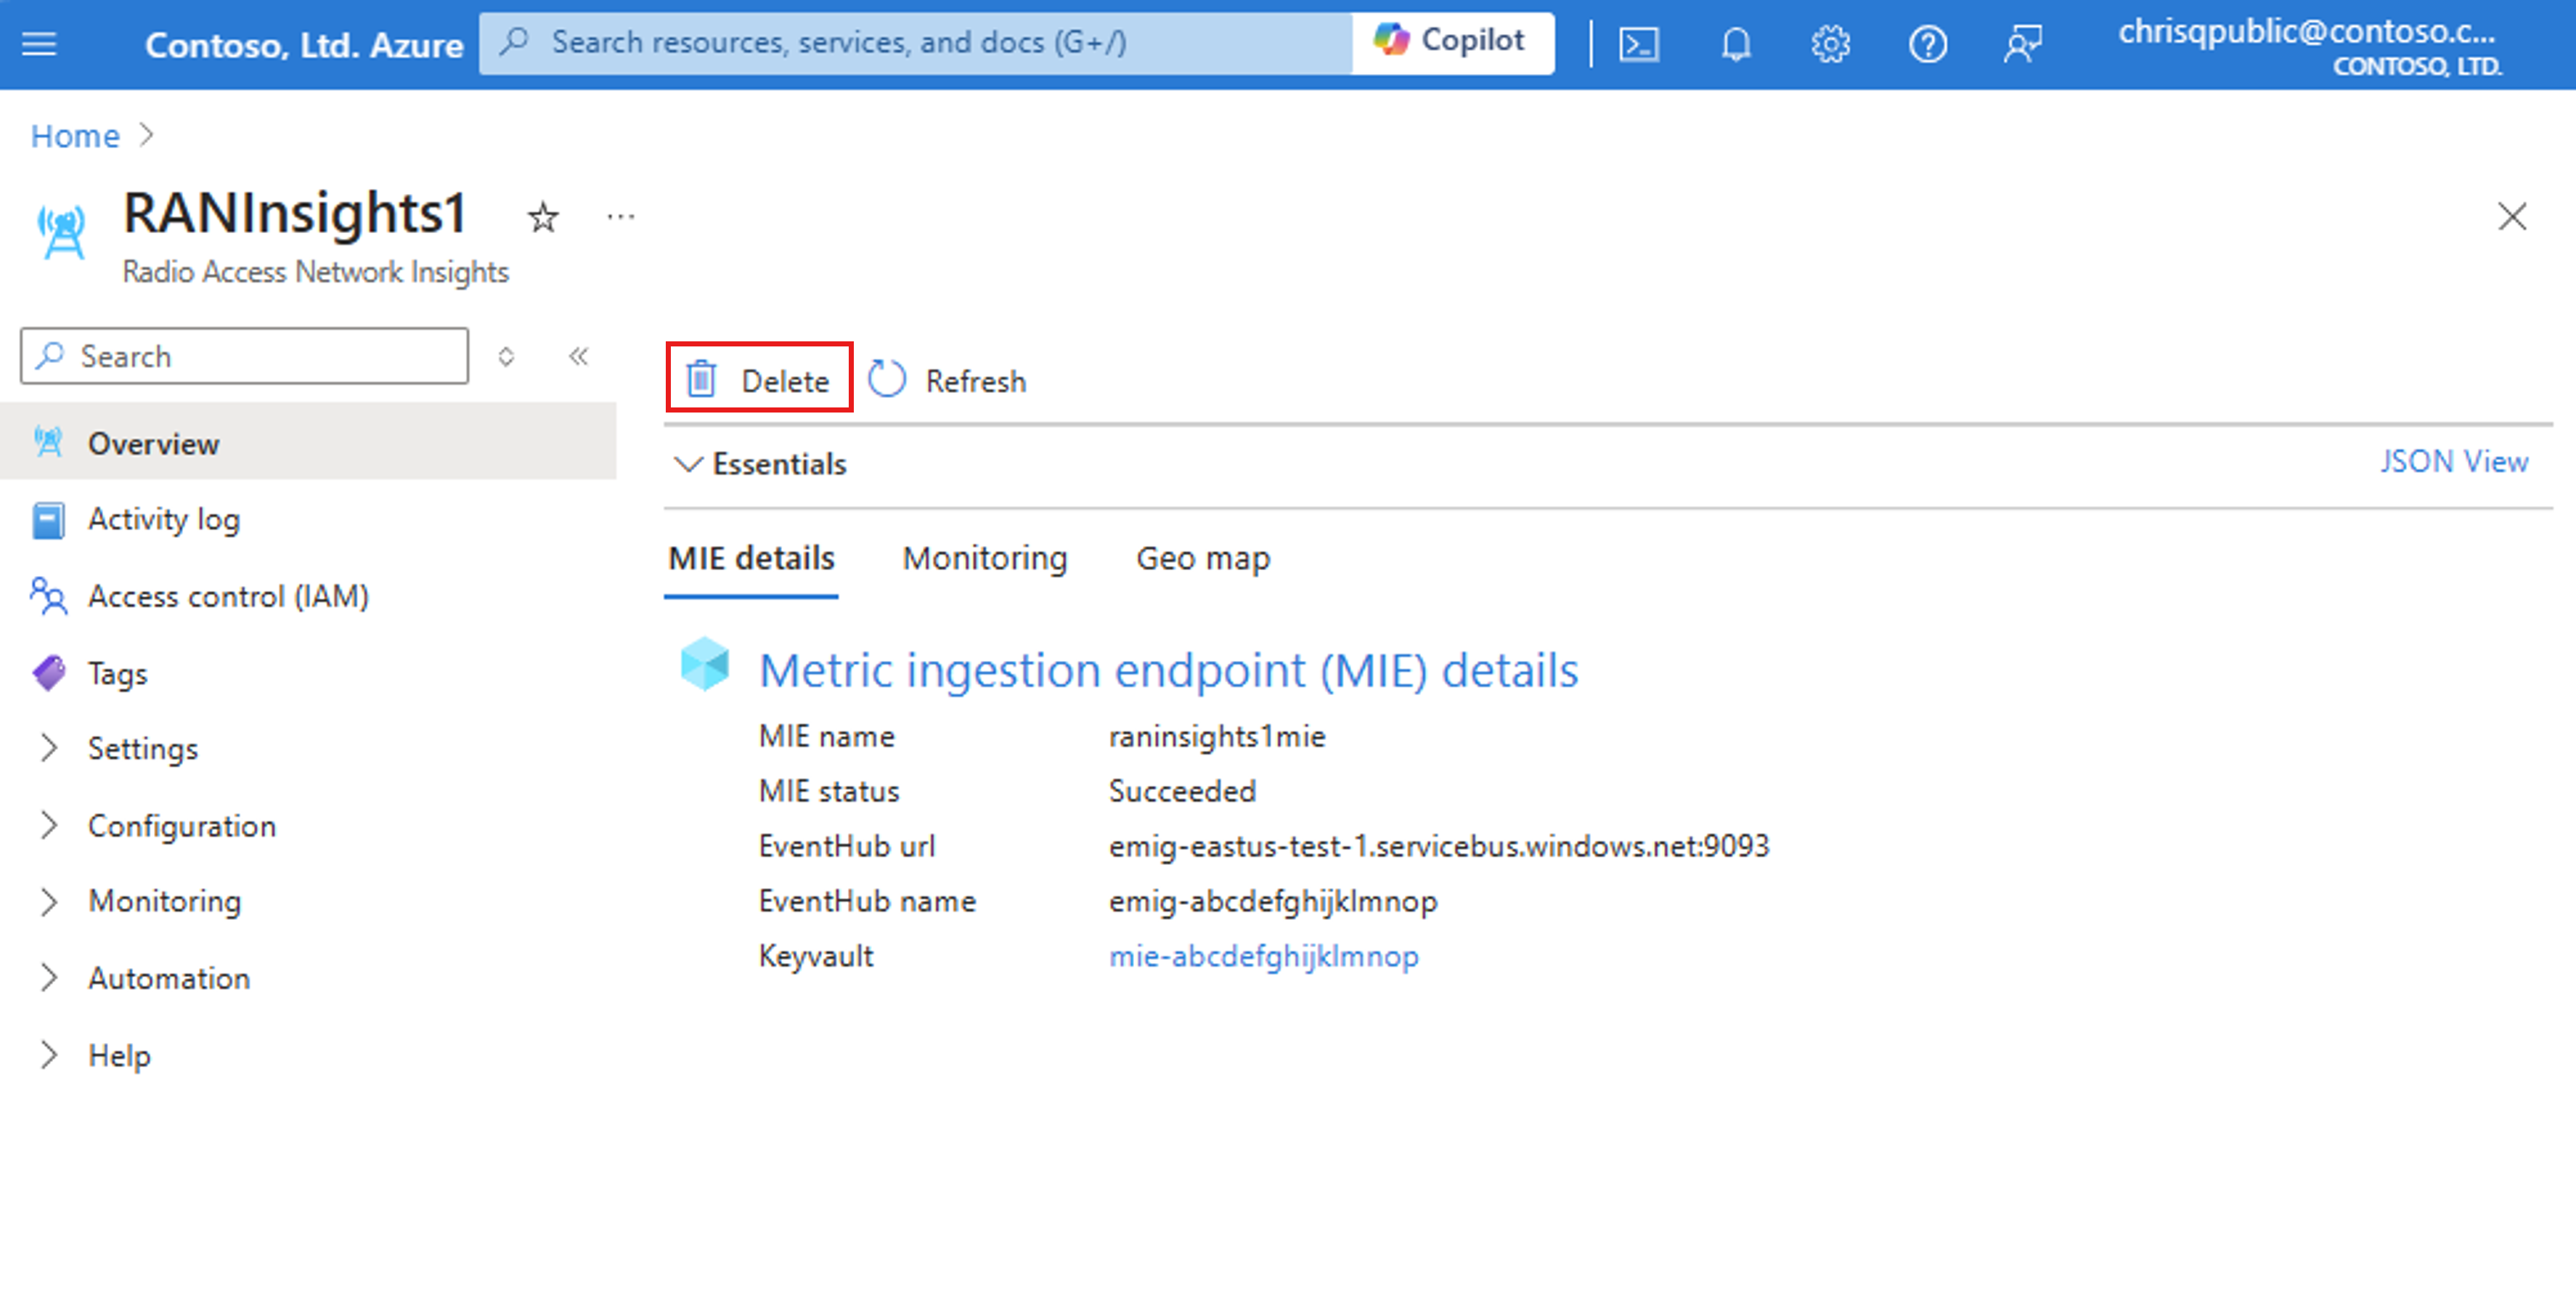 Screenshot of the Azure portal showing deleting a RAN insight resource on the RAN insight resource.